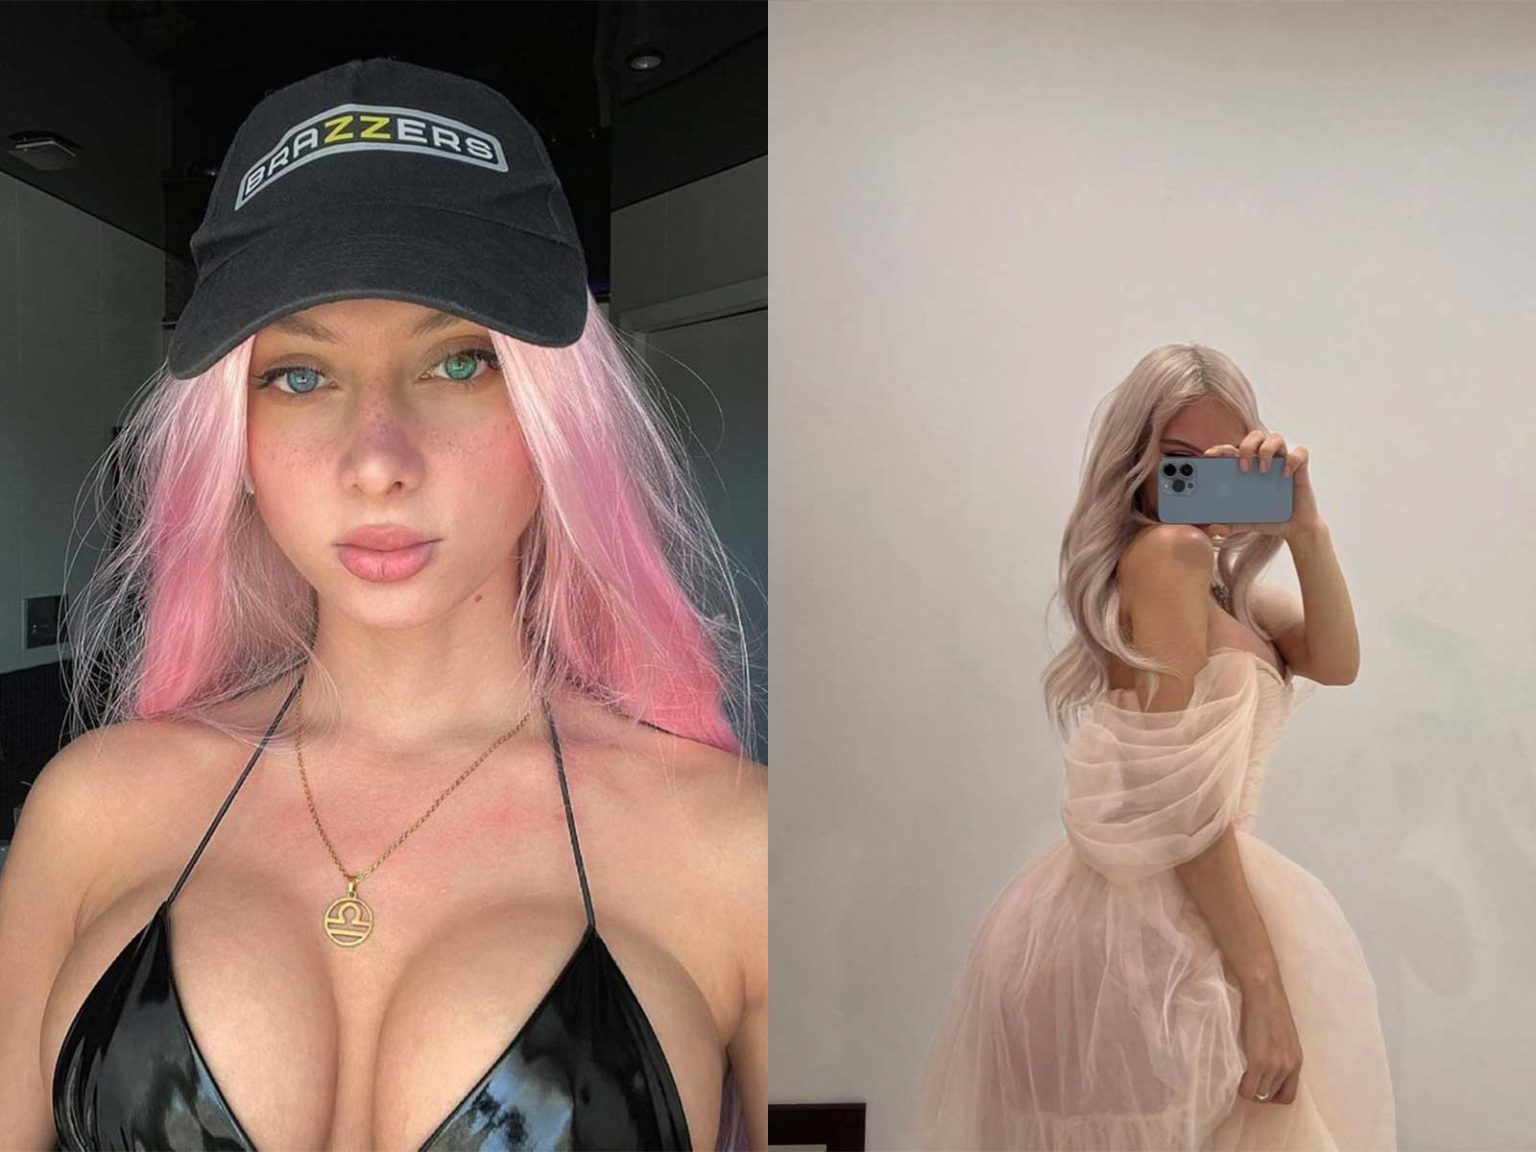 Meet Kate Kirienko The Mysterious Russian Model With 1m Instagram Followers 5orry